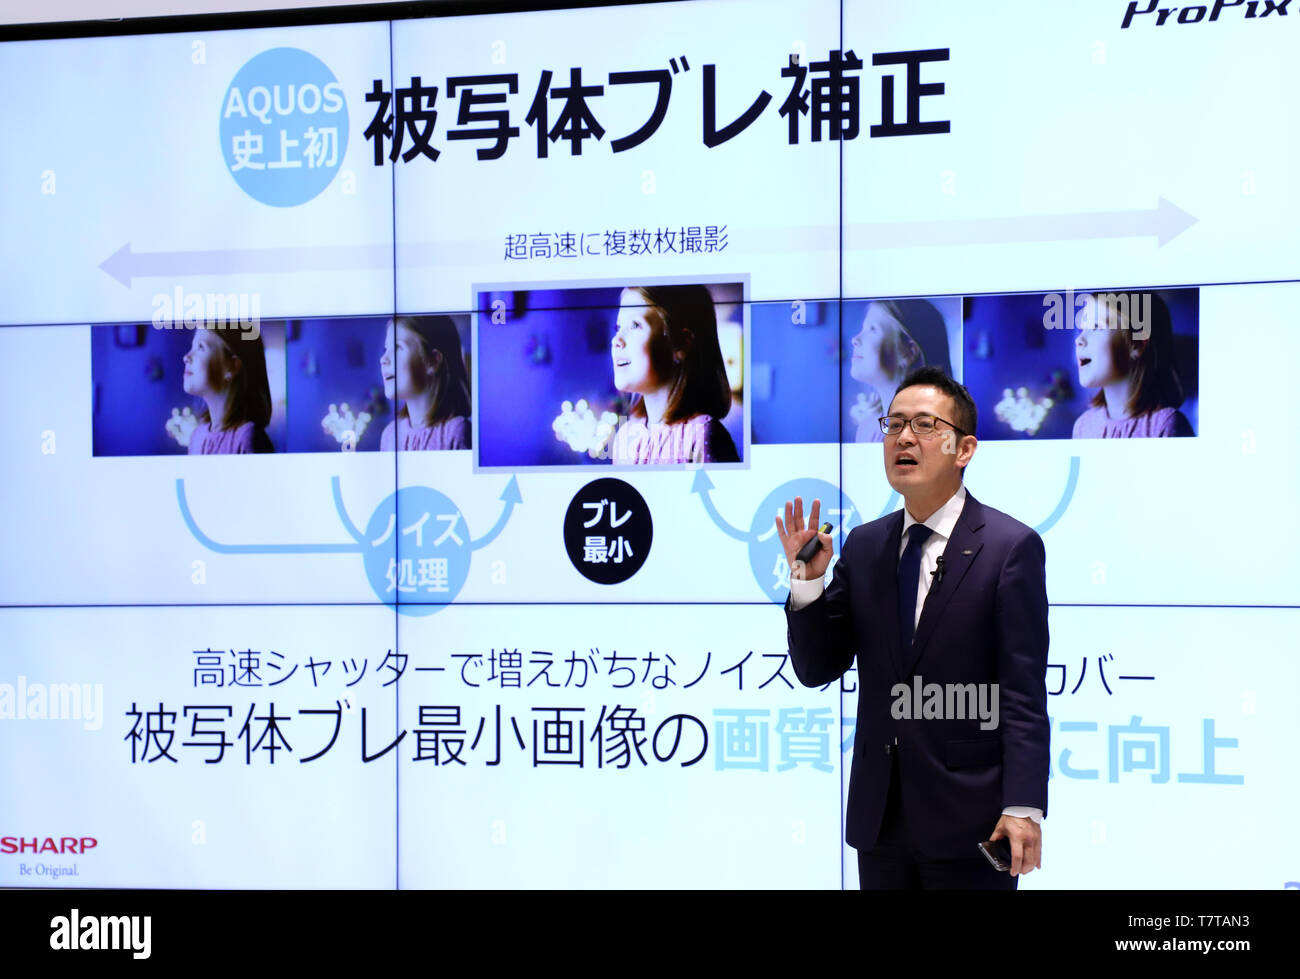 Tokyo, Japan. 8th May, 2019. Japanese electronics giant Sharp mobile communication business unit general manager Shigeru Kobayashi introduces the company's new smart phone "AQUOS R3" which will go on sale this summer at the company's Tokyo office on Wednesday, May 8, 2019. The new AQUOS smart phone has newly developed 6.2-inch sized IGZO LCD on its display which can reproduce 1 billion color images. Credit: Yoshio Tsunoda/AFLO/Alamy Live News Stock Photo